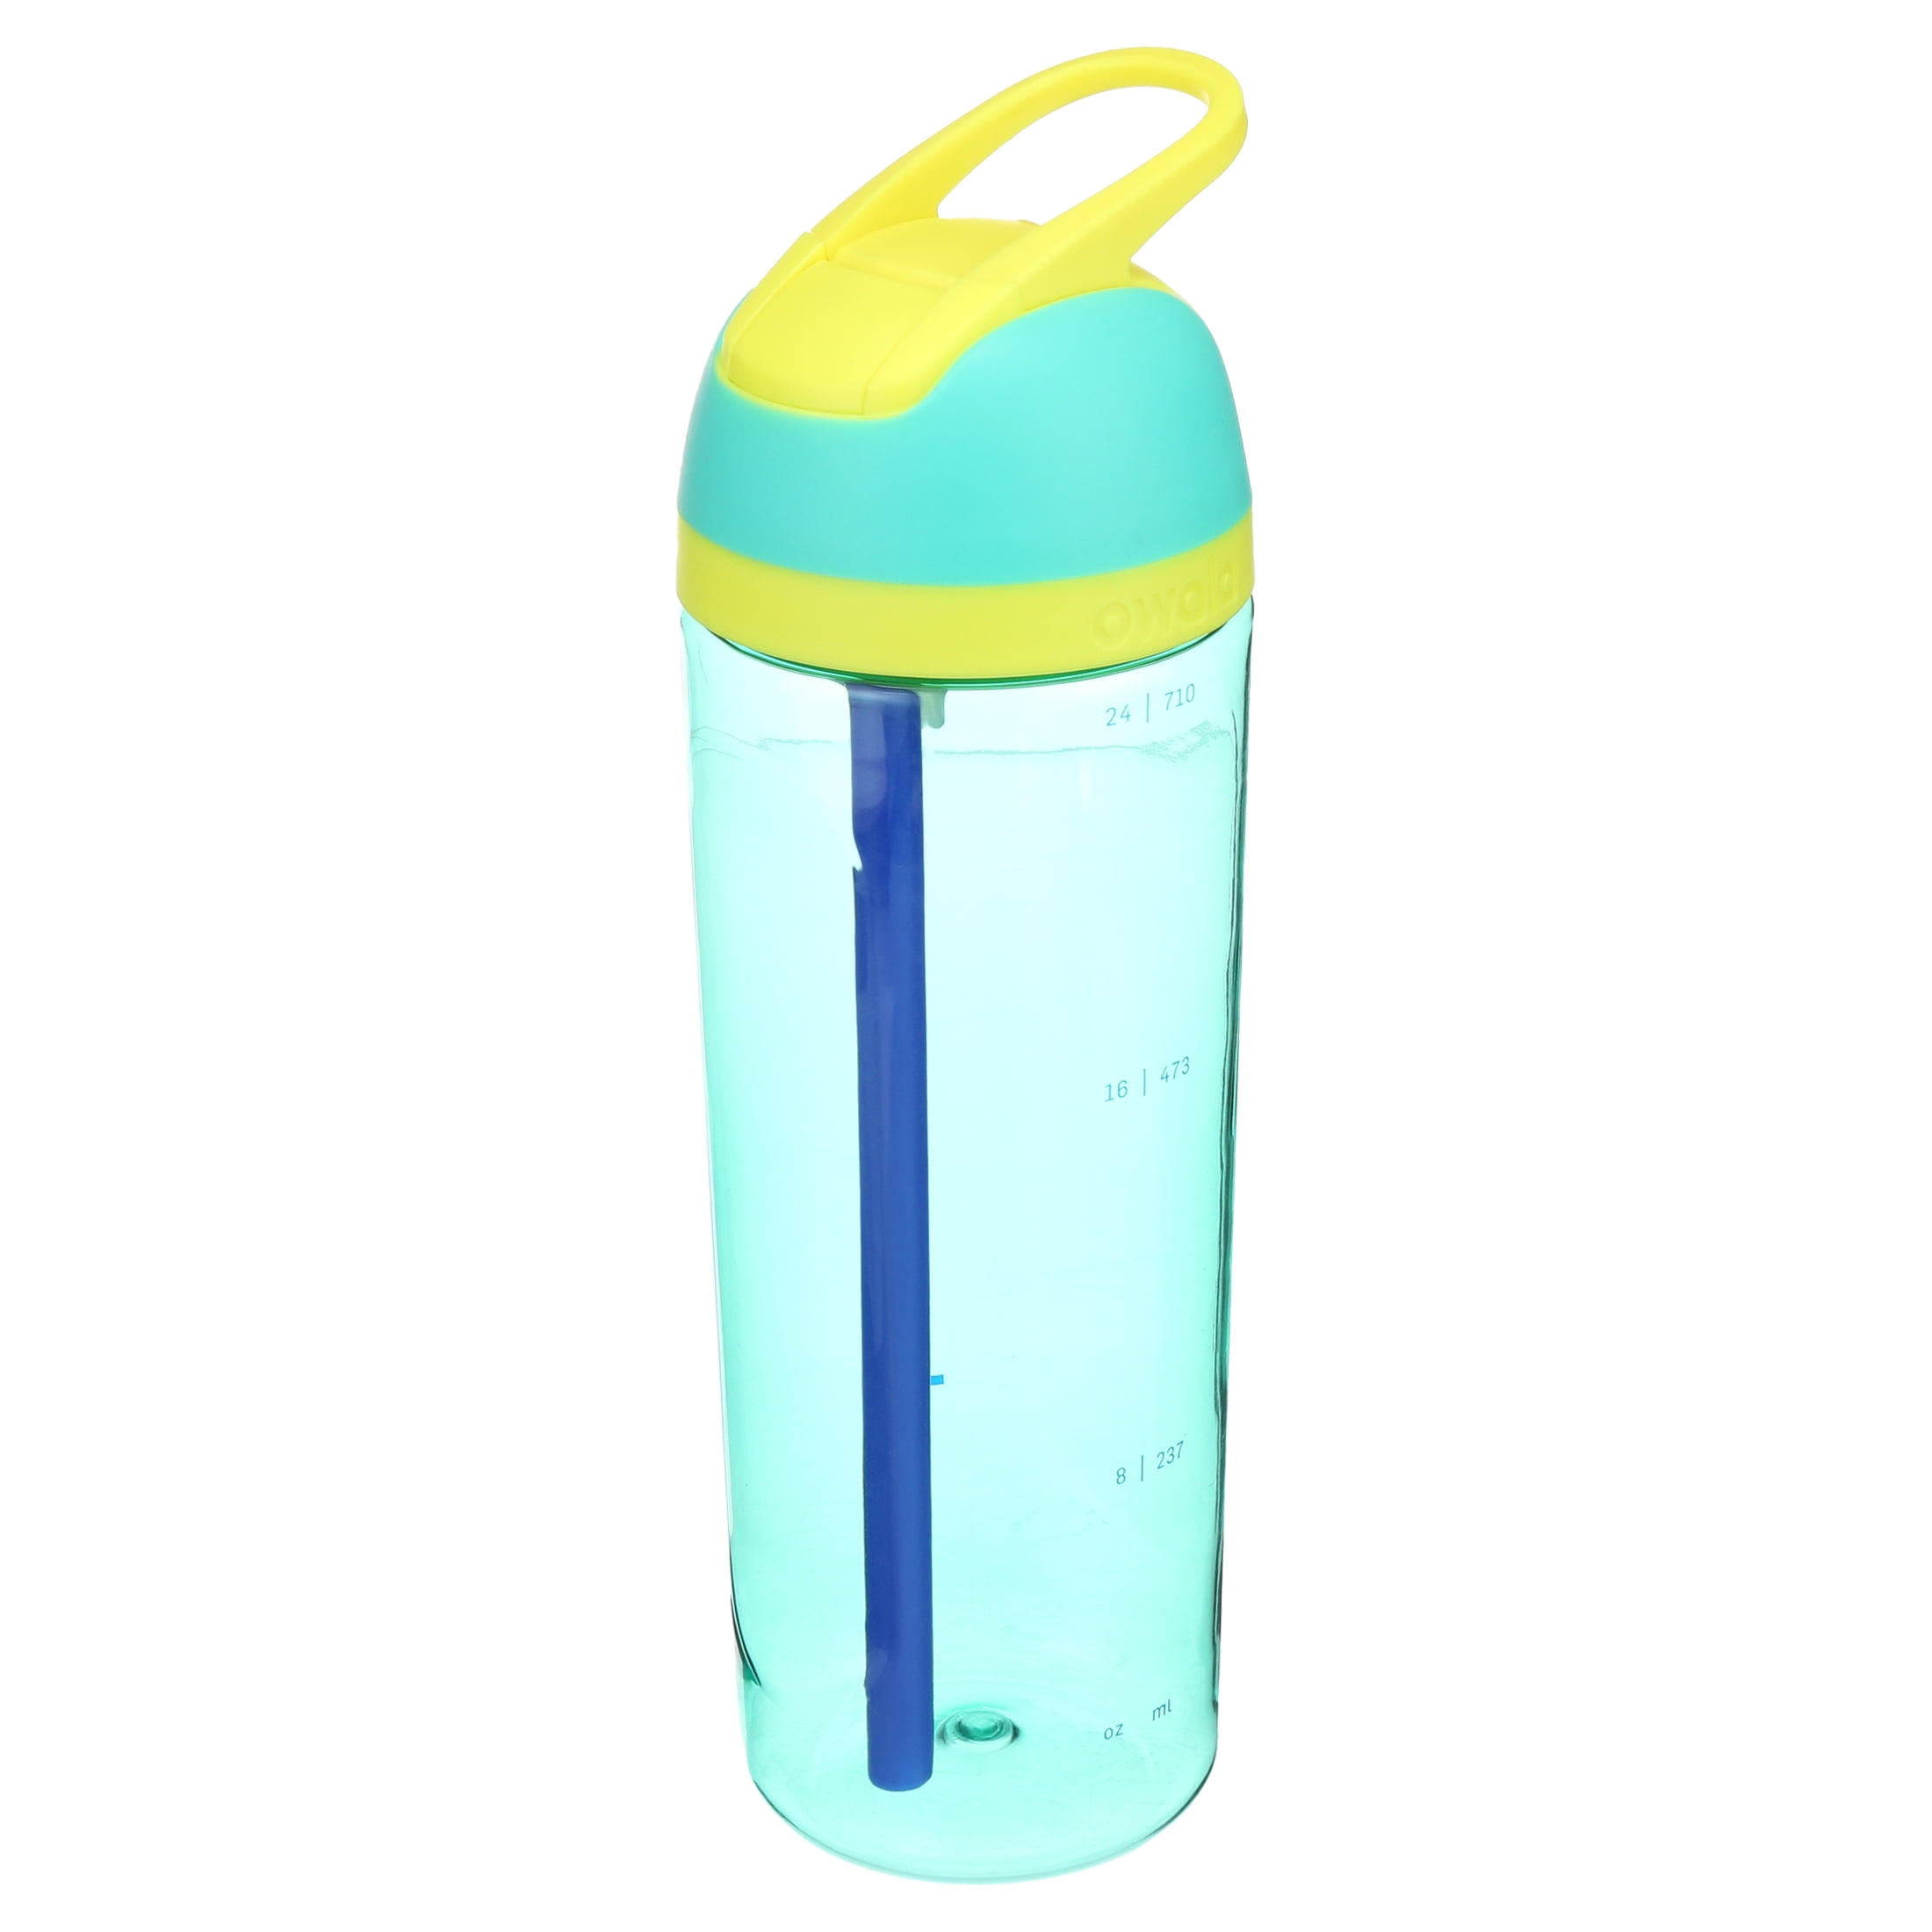 I dont care that i'm obsessed #owalawaterbottle #owalabottle #waterbot, owala water bottle